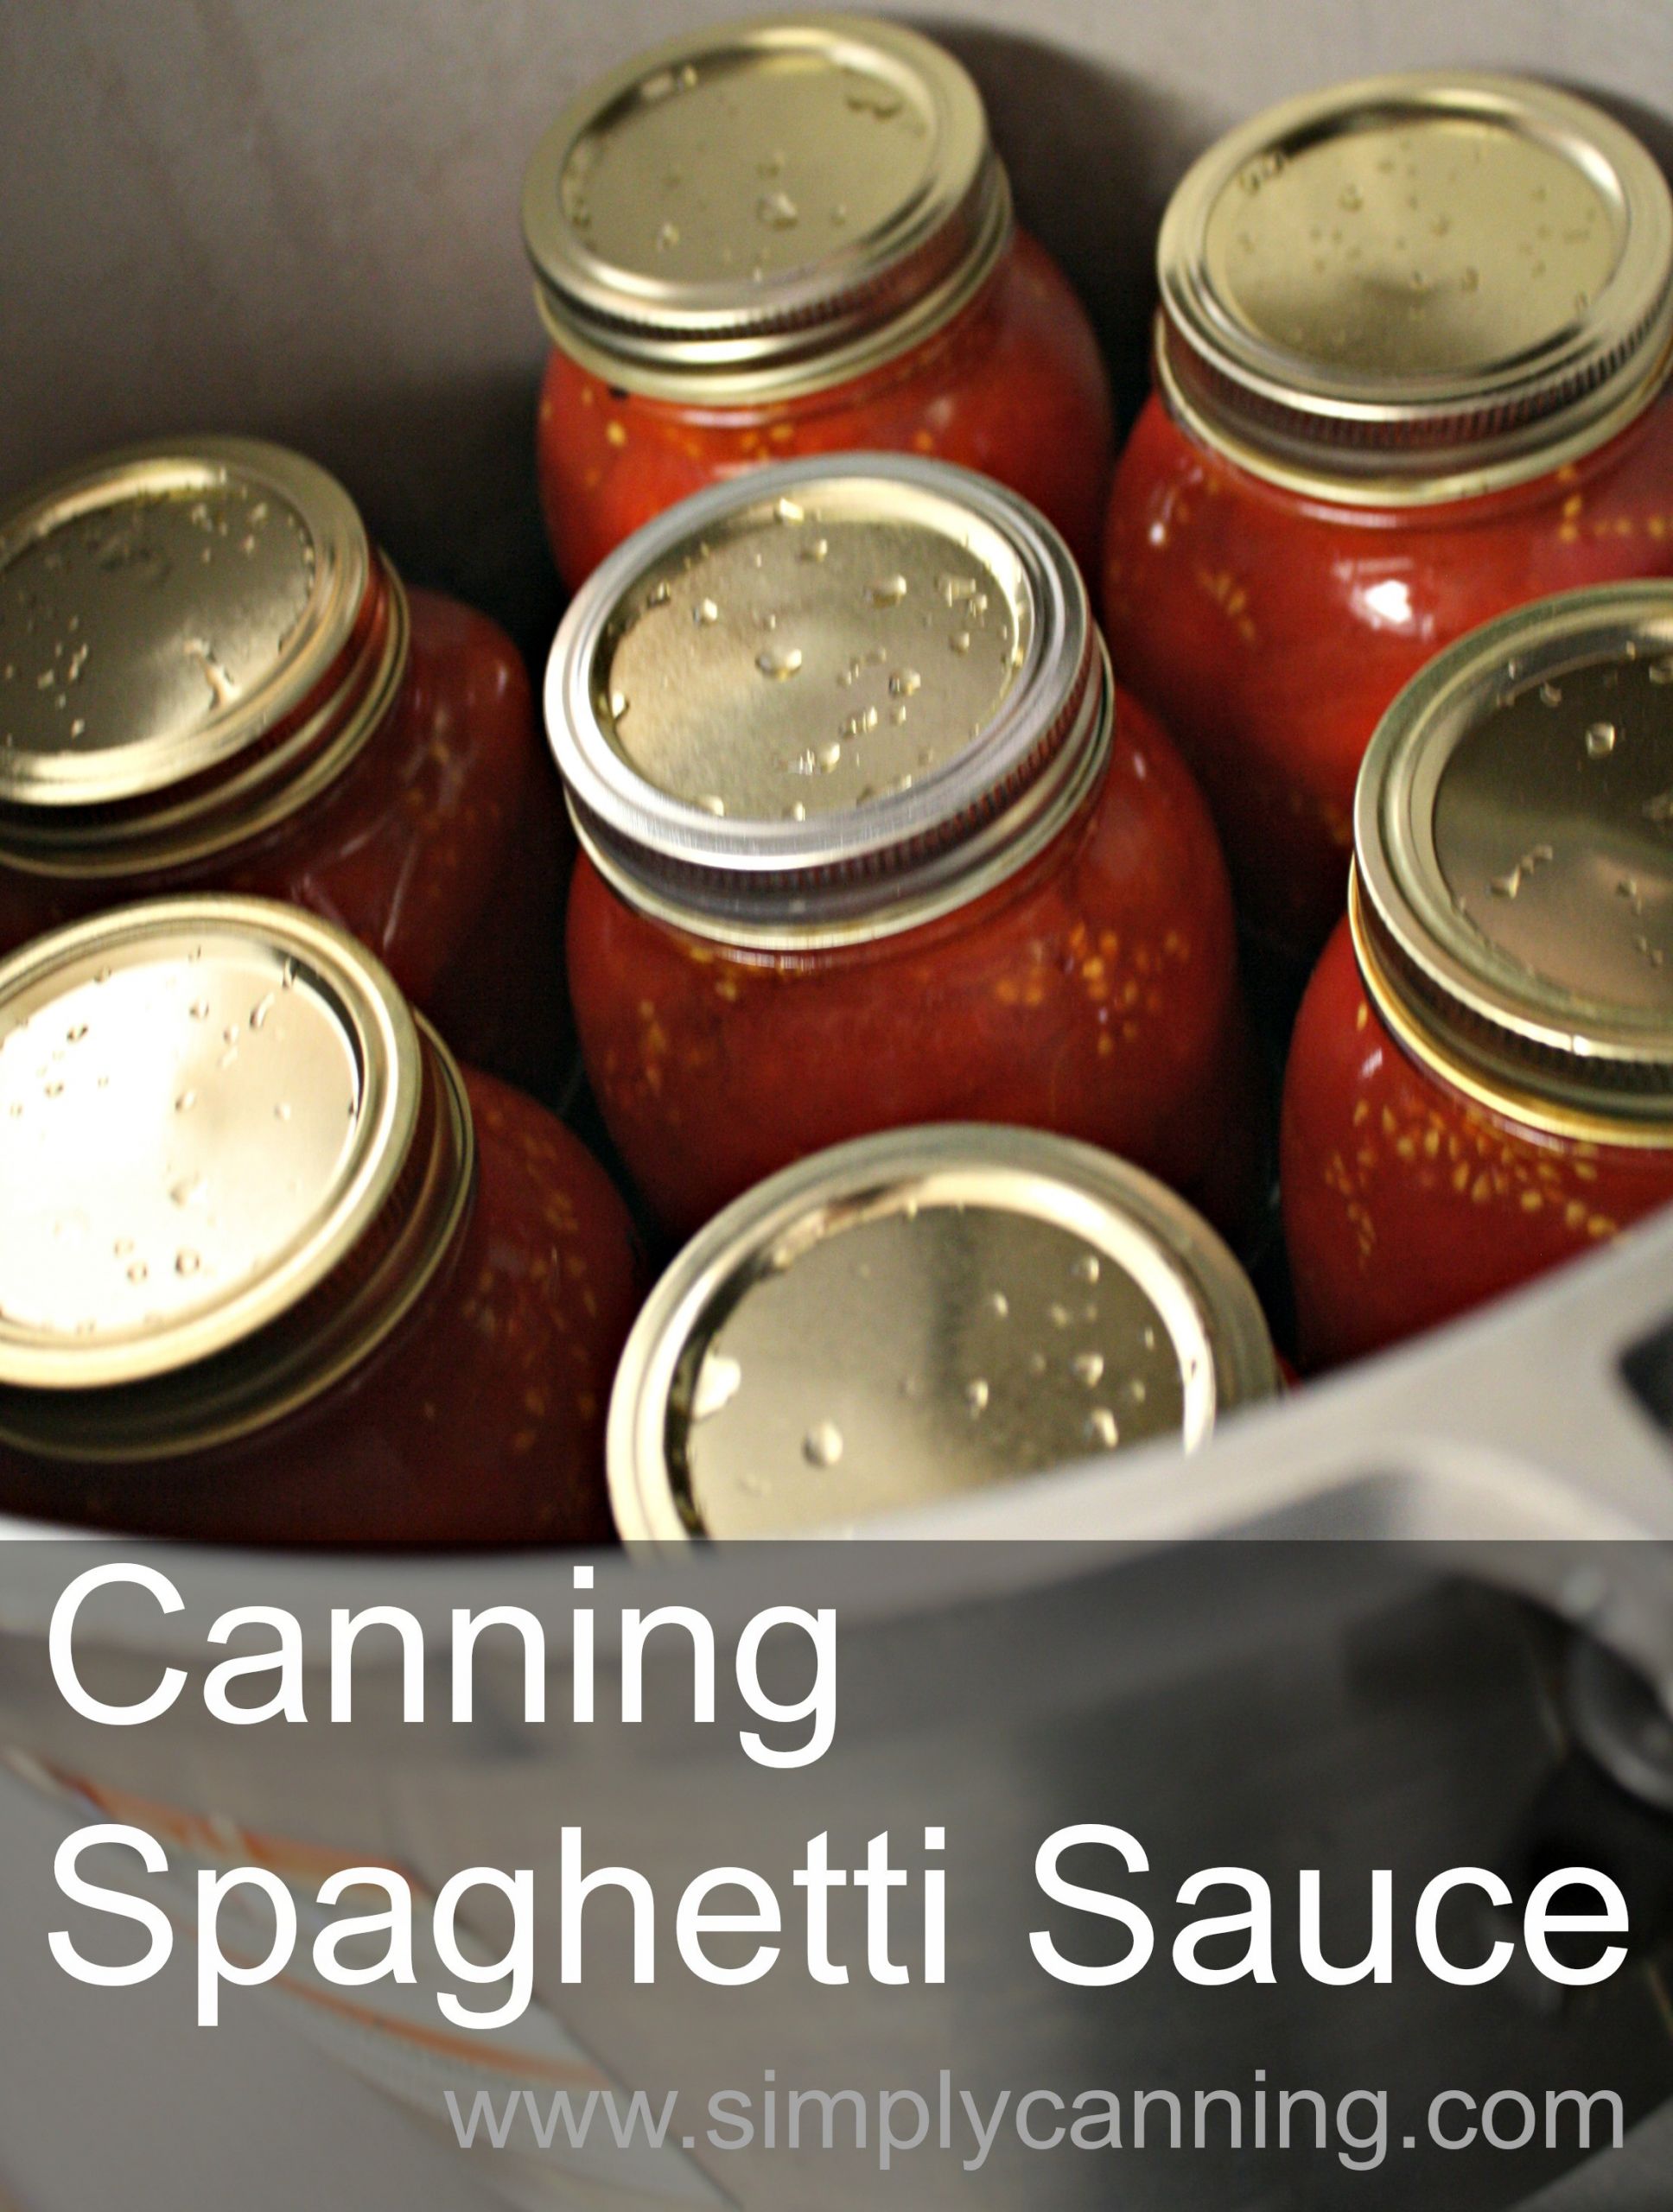 Canning Spaghetti Sauce Recipe
 Canning Spaghetti Sauce Recipe with meat that will save